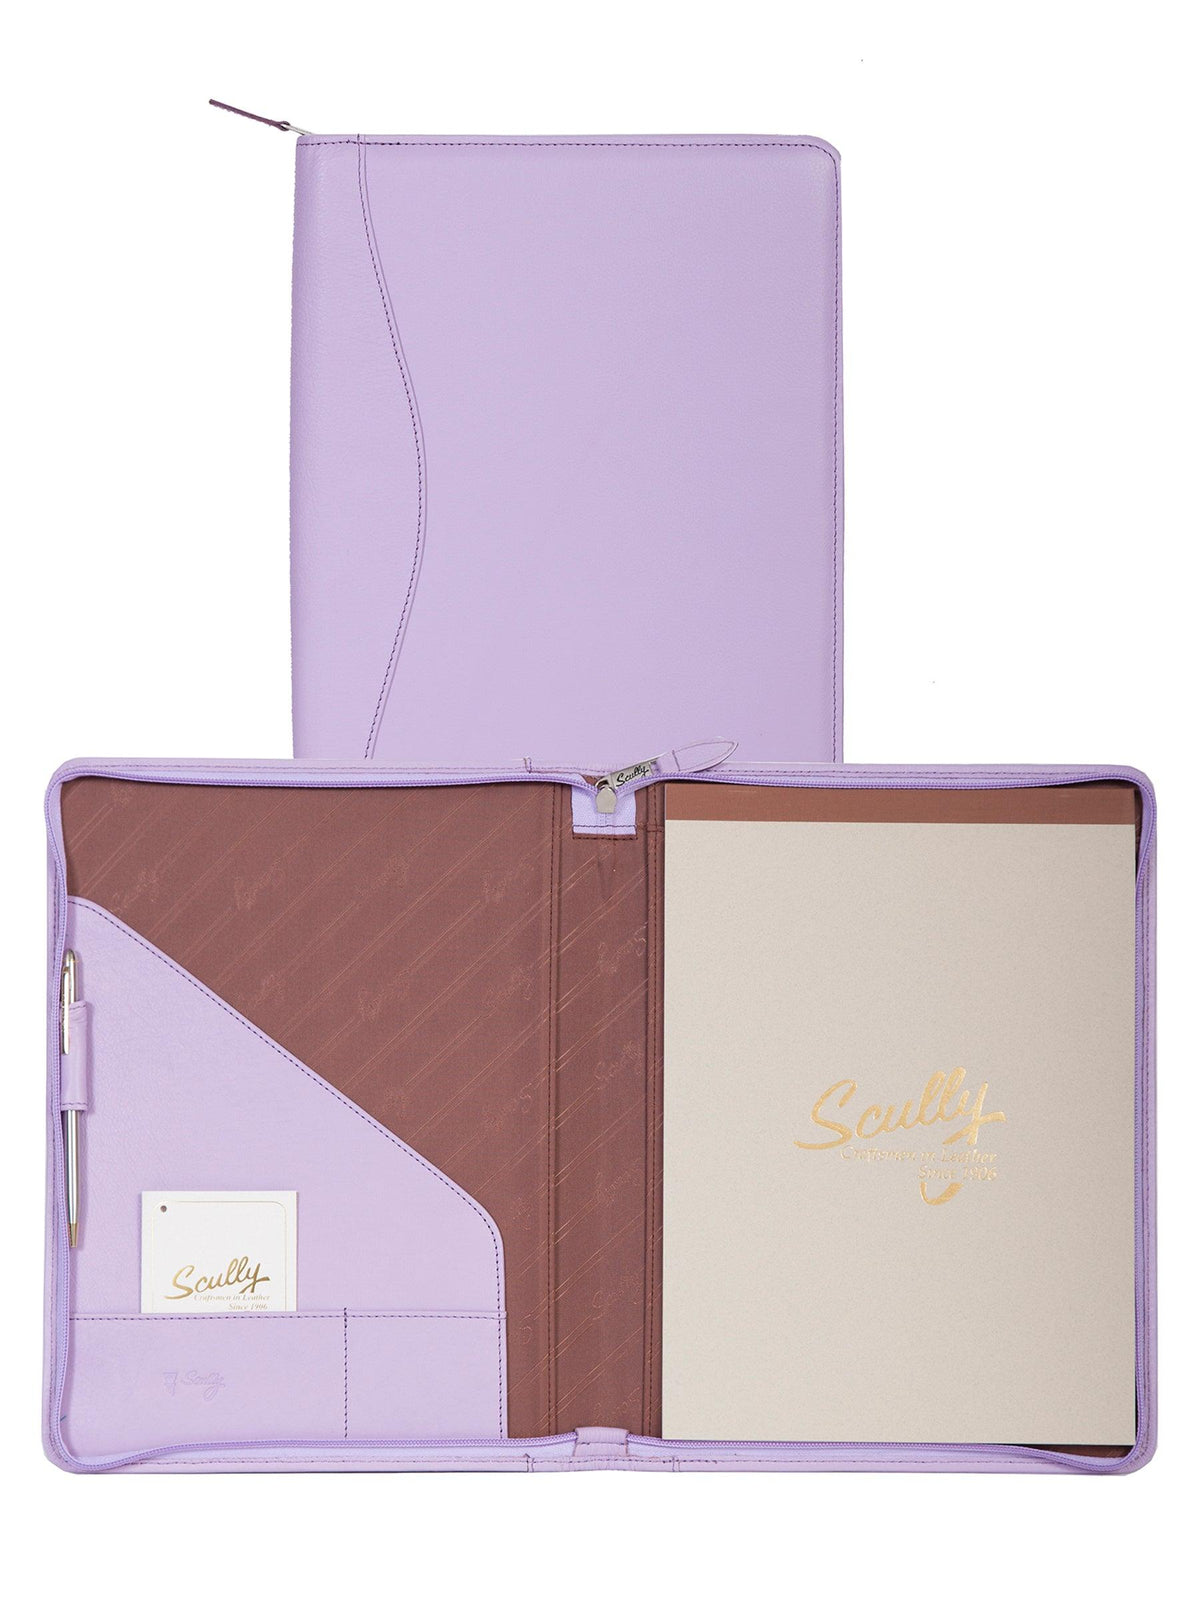 Scully LAVENDER ZIP LETTER SIZE PAD - Flyclothing LLC